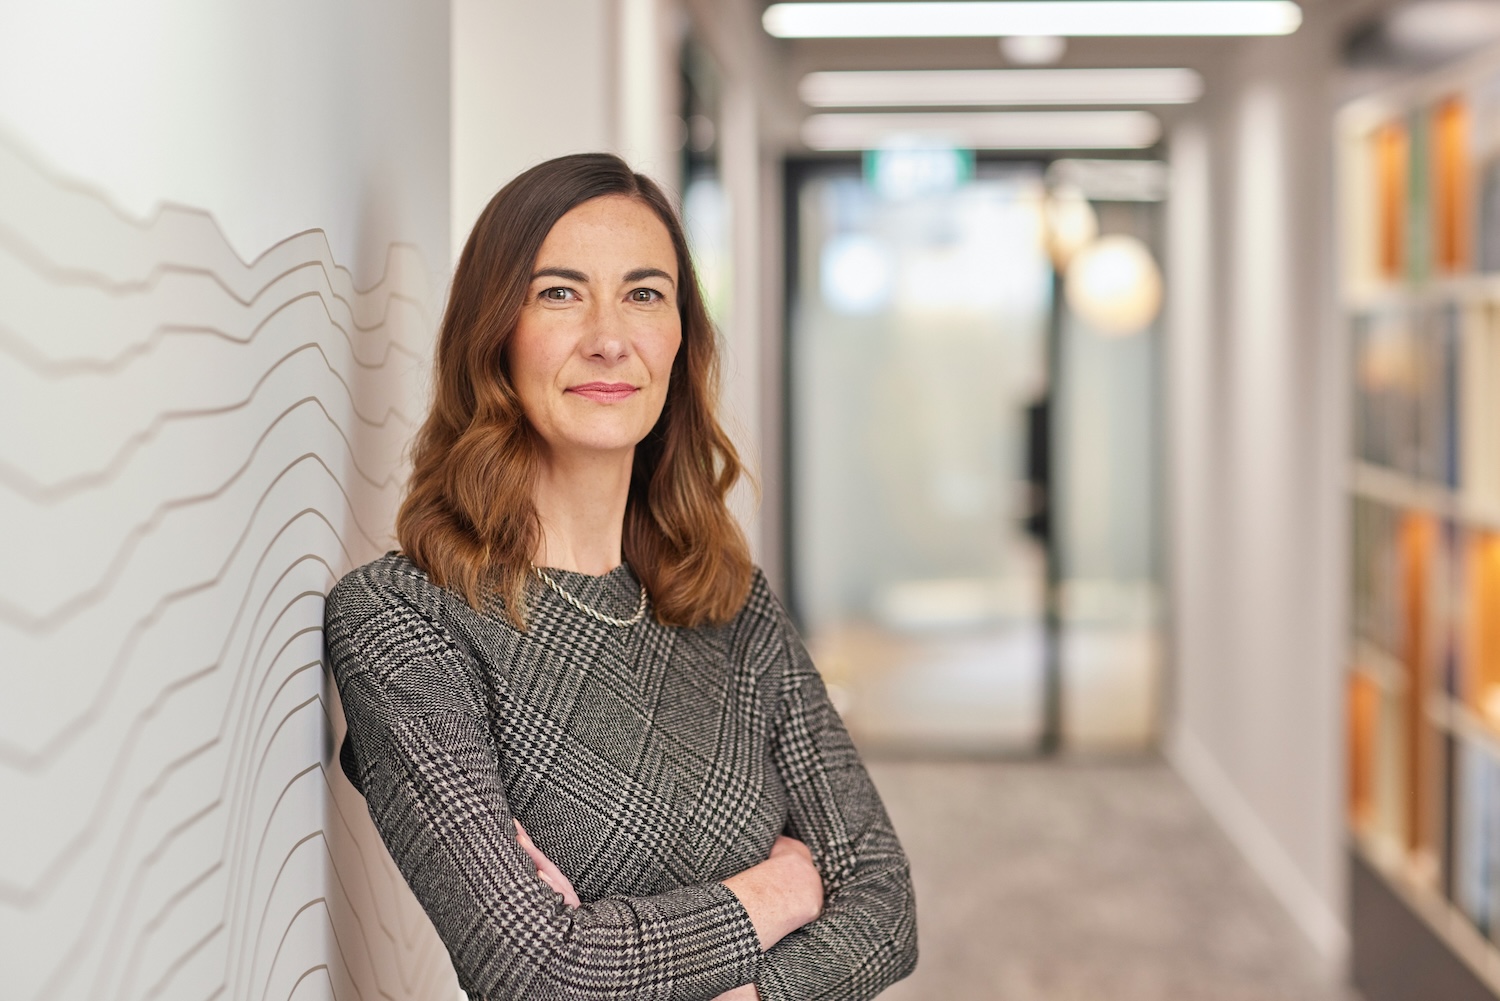 Future Asset appoints Jen Mair as chair to lead diversity initiative in finance